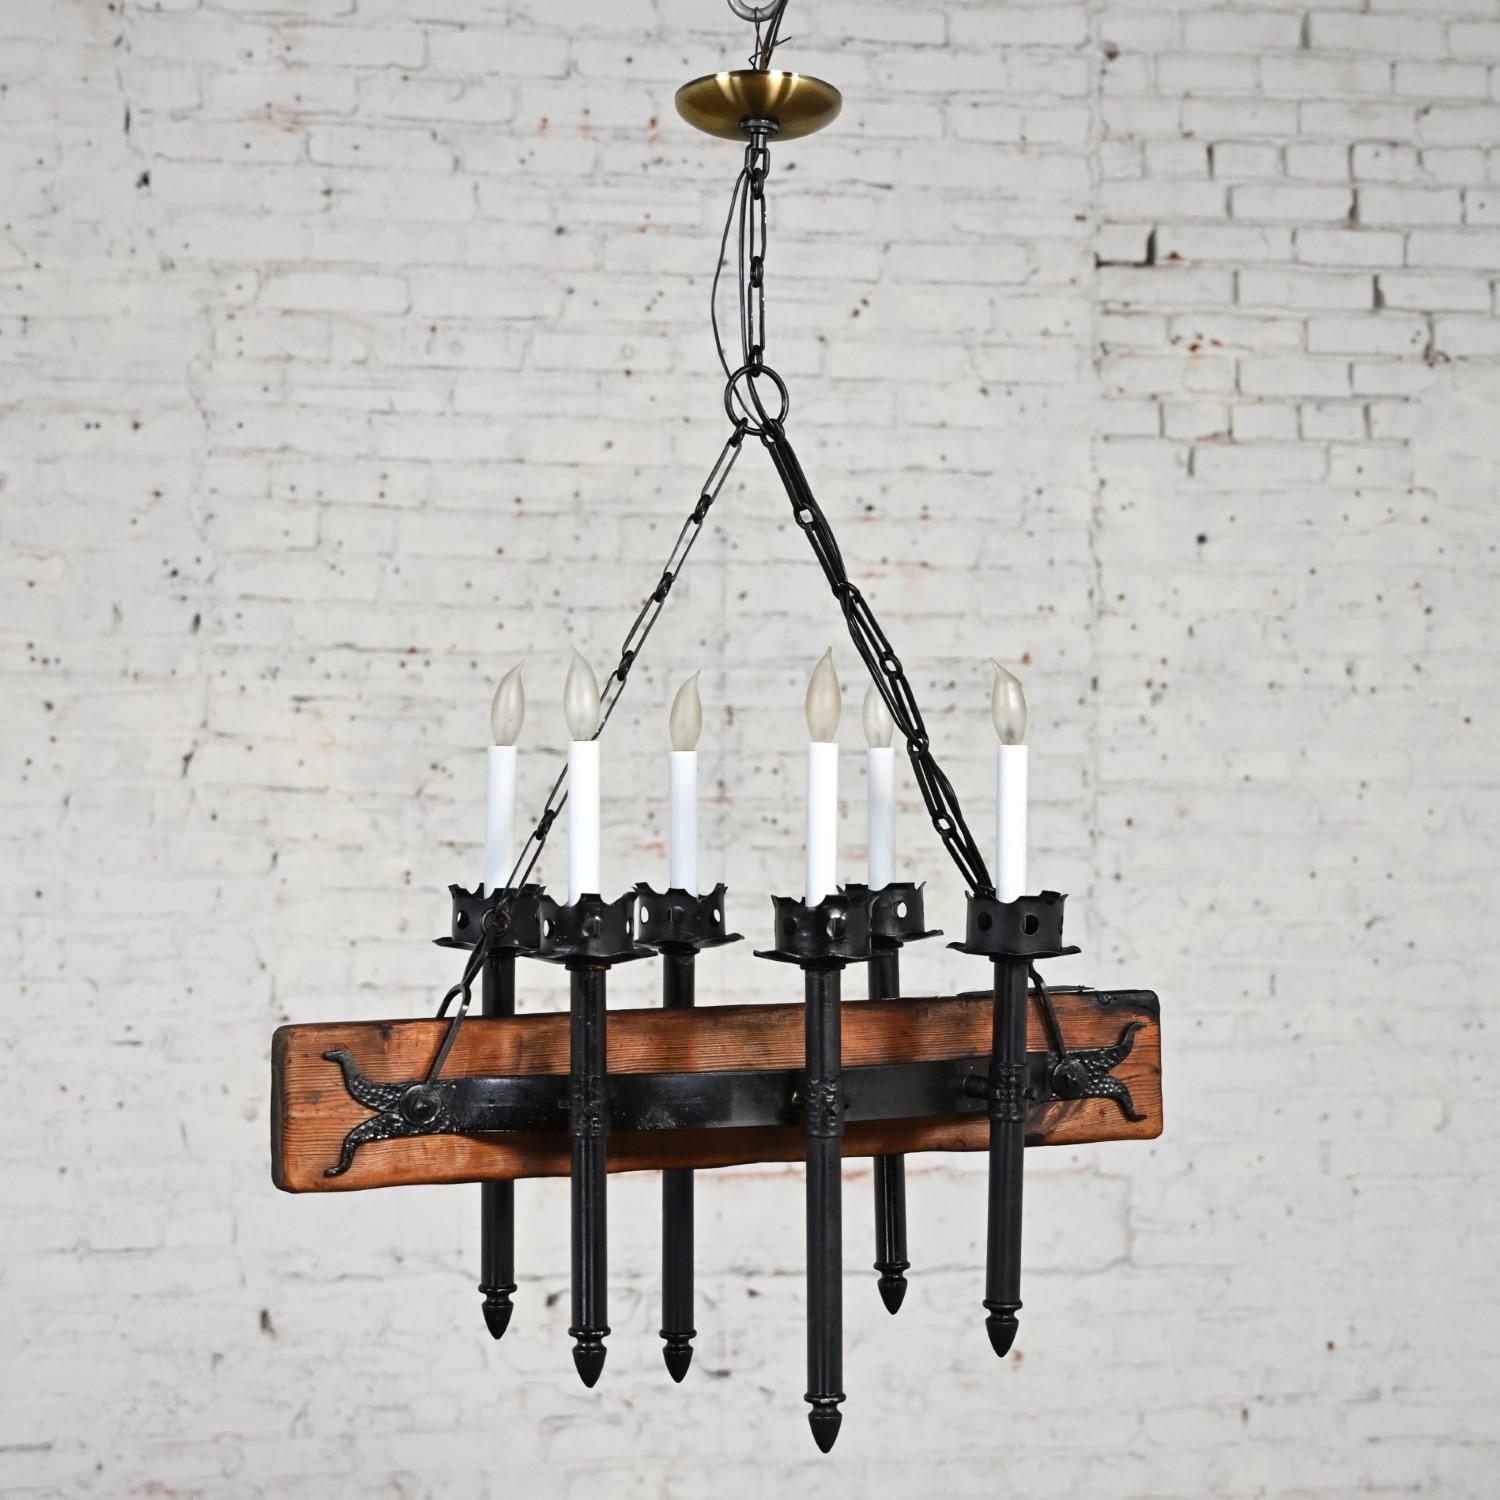 Medieval Gothic Spanish Revival Iron & Wood Beam Hanging Light Fixture Mexico For Sale 13